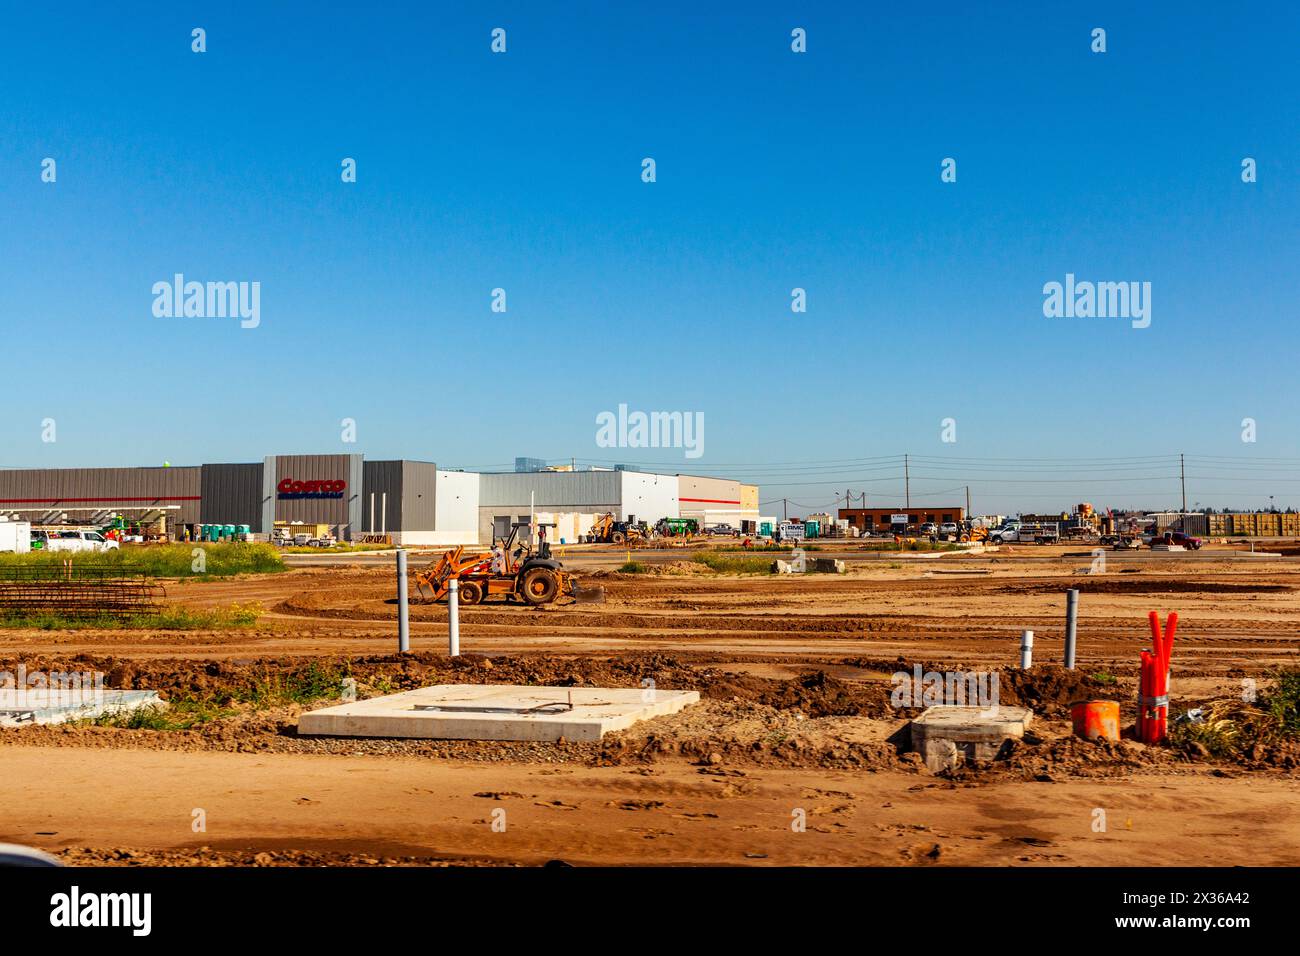 A new Costco Wholesale warehouse store under construction in Riverbank California Stanislaus County USA Stock Photo